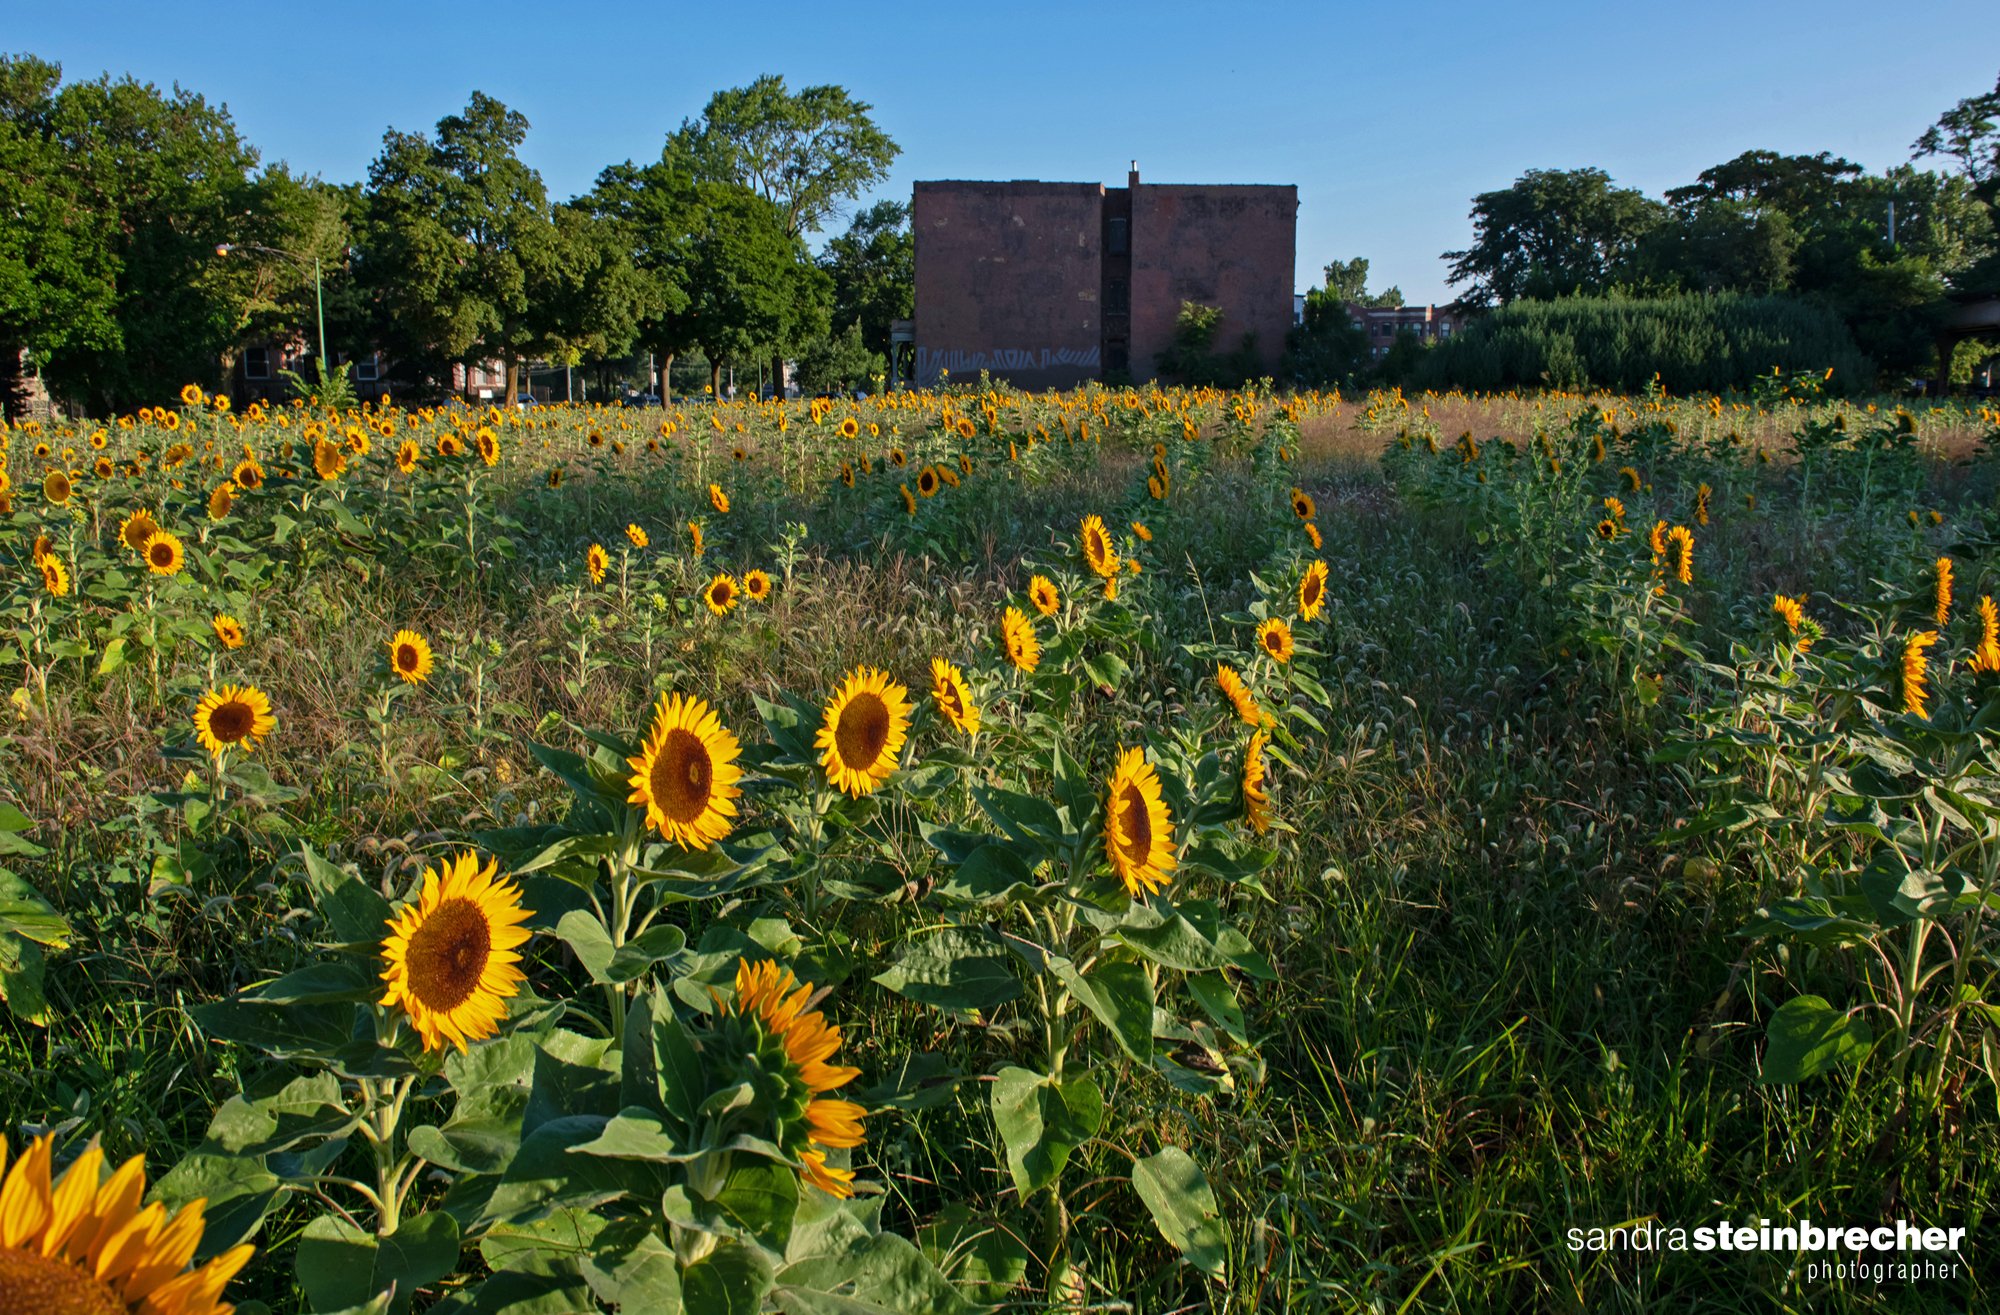 Sunflowers in bloom at 54th St &amp; S Prairie Ave